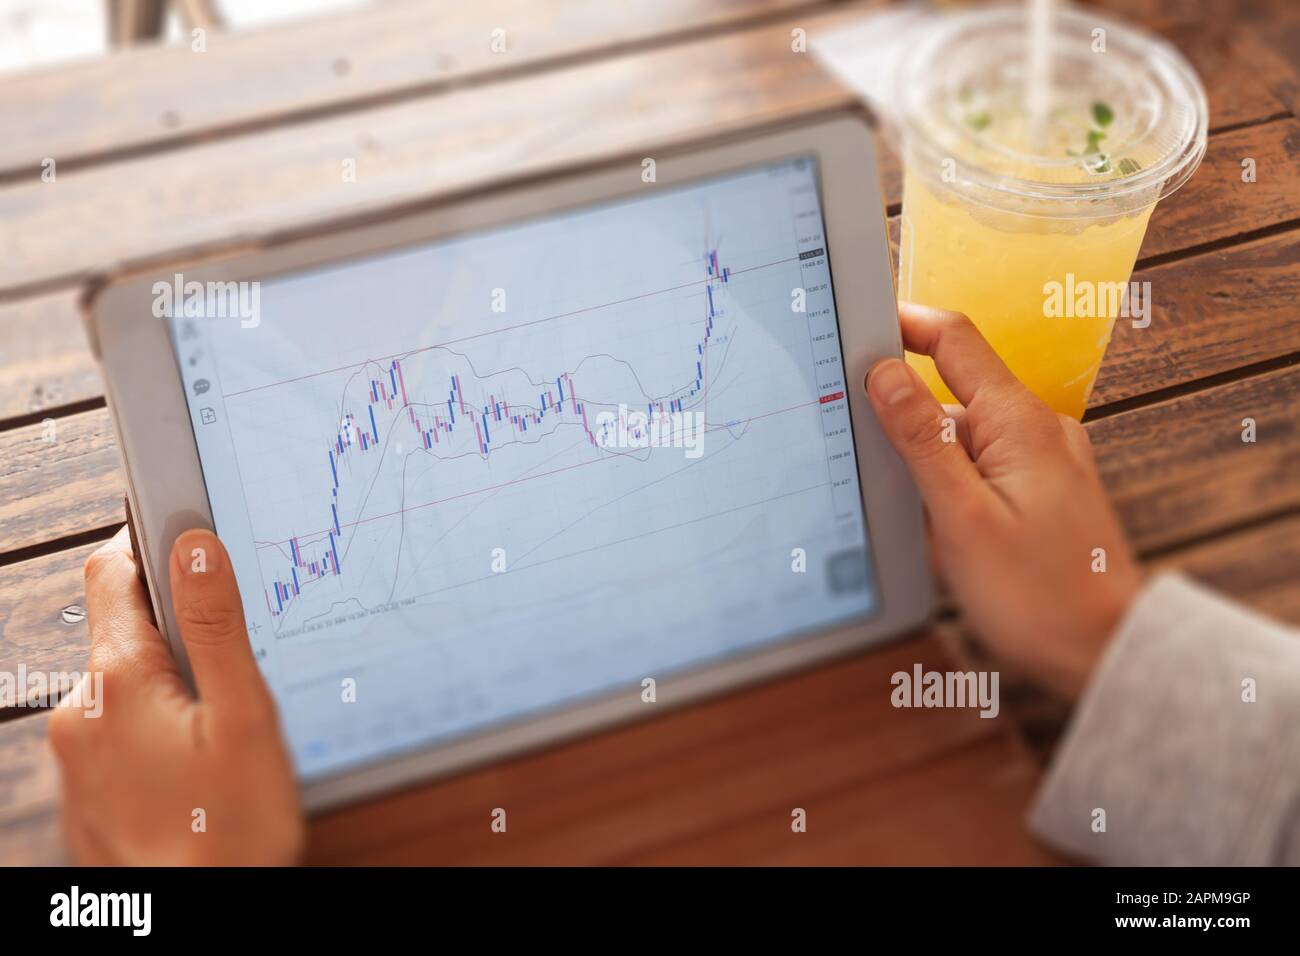 Woman hand trading online on tablet, stock photo Stock Photo